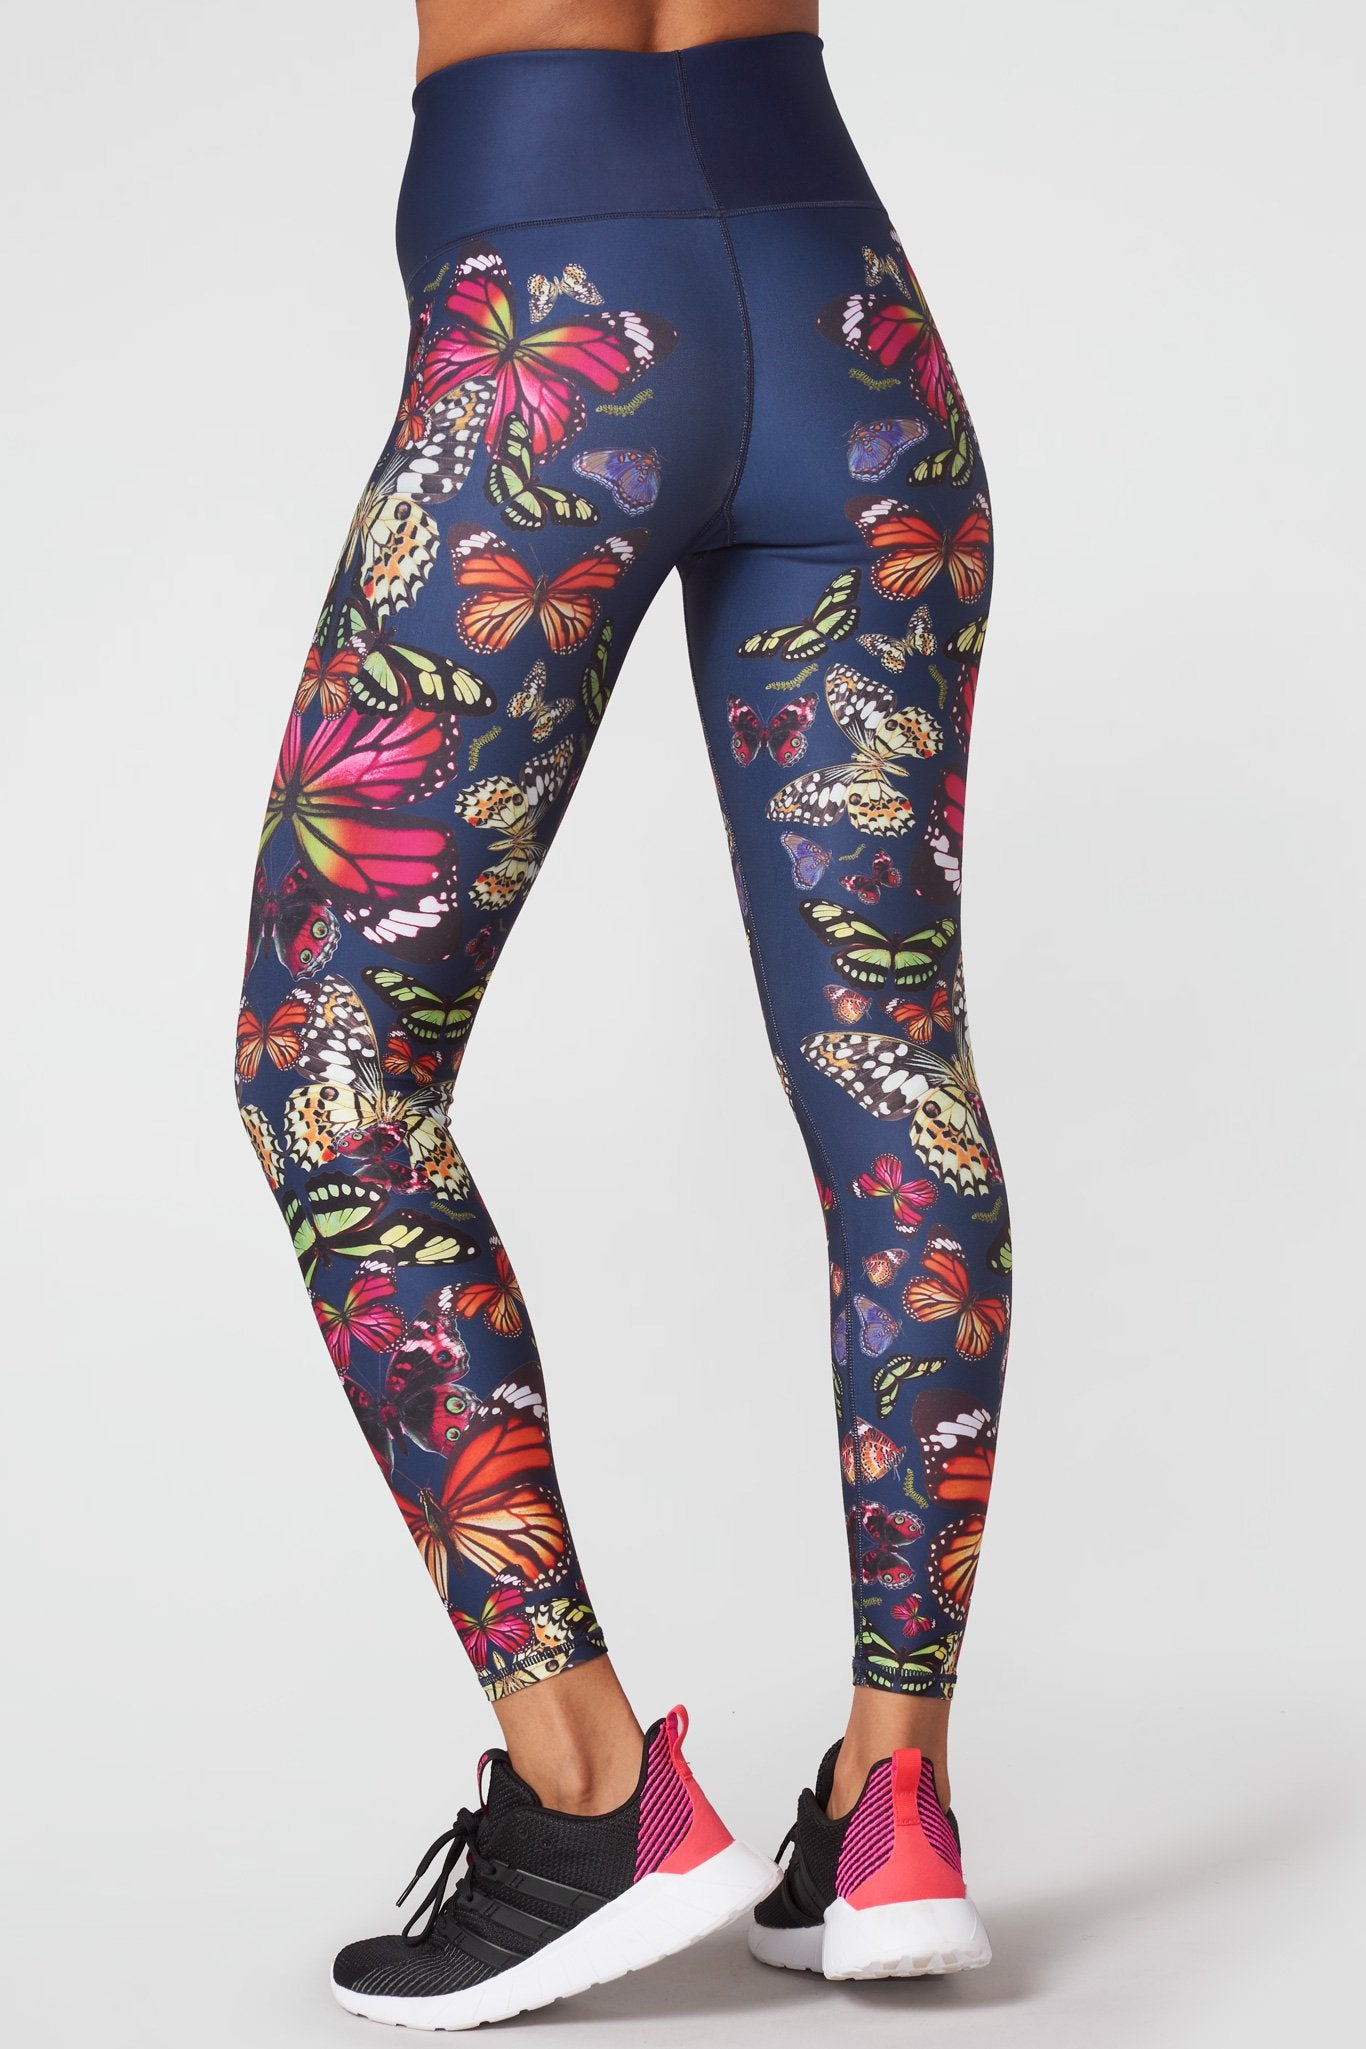 Discover more than 265 womens printed leggings best